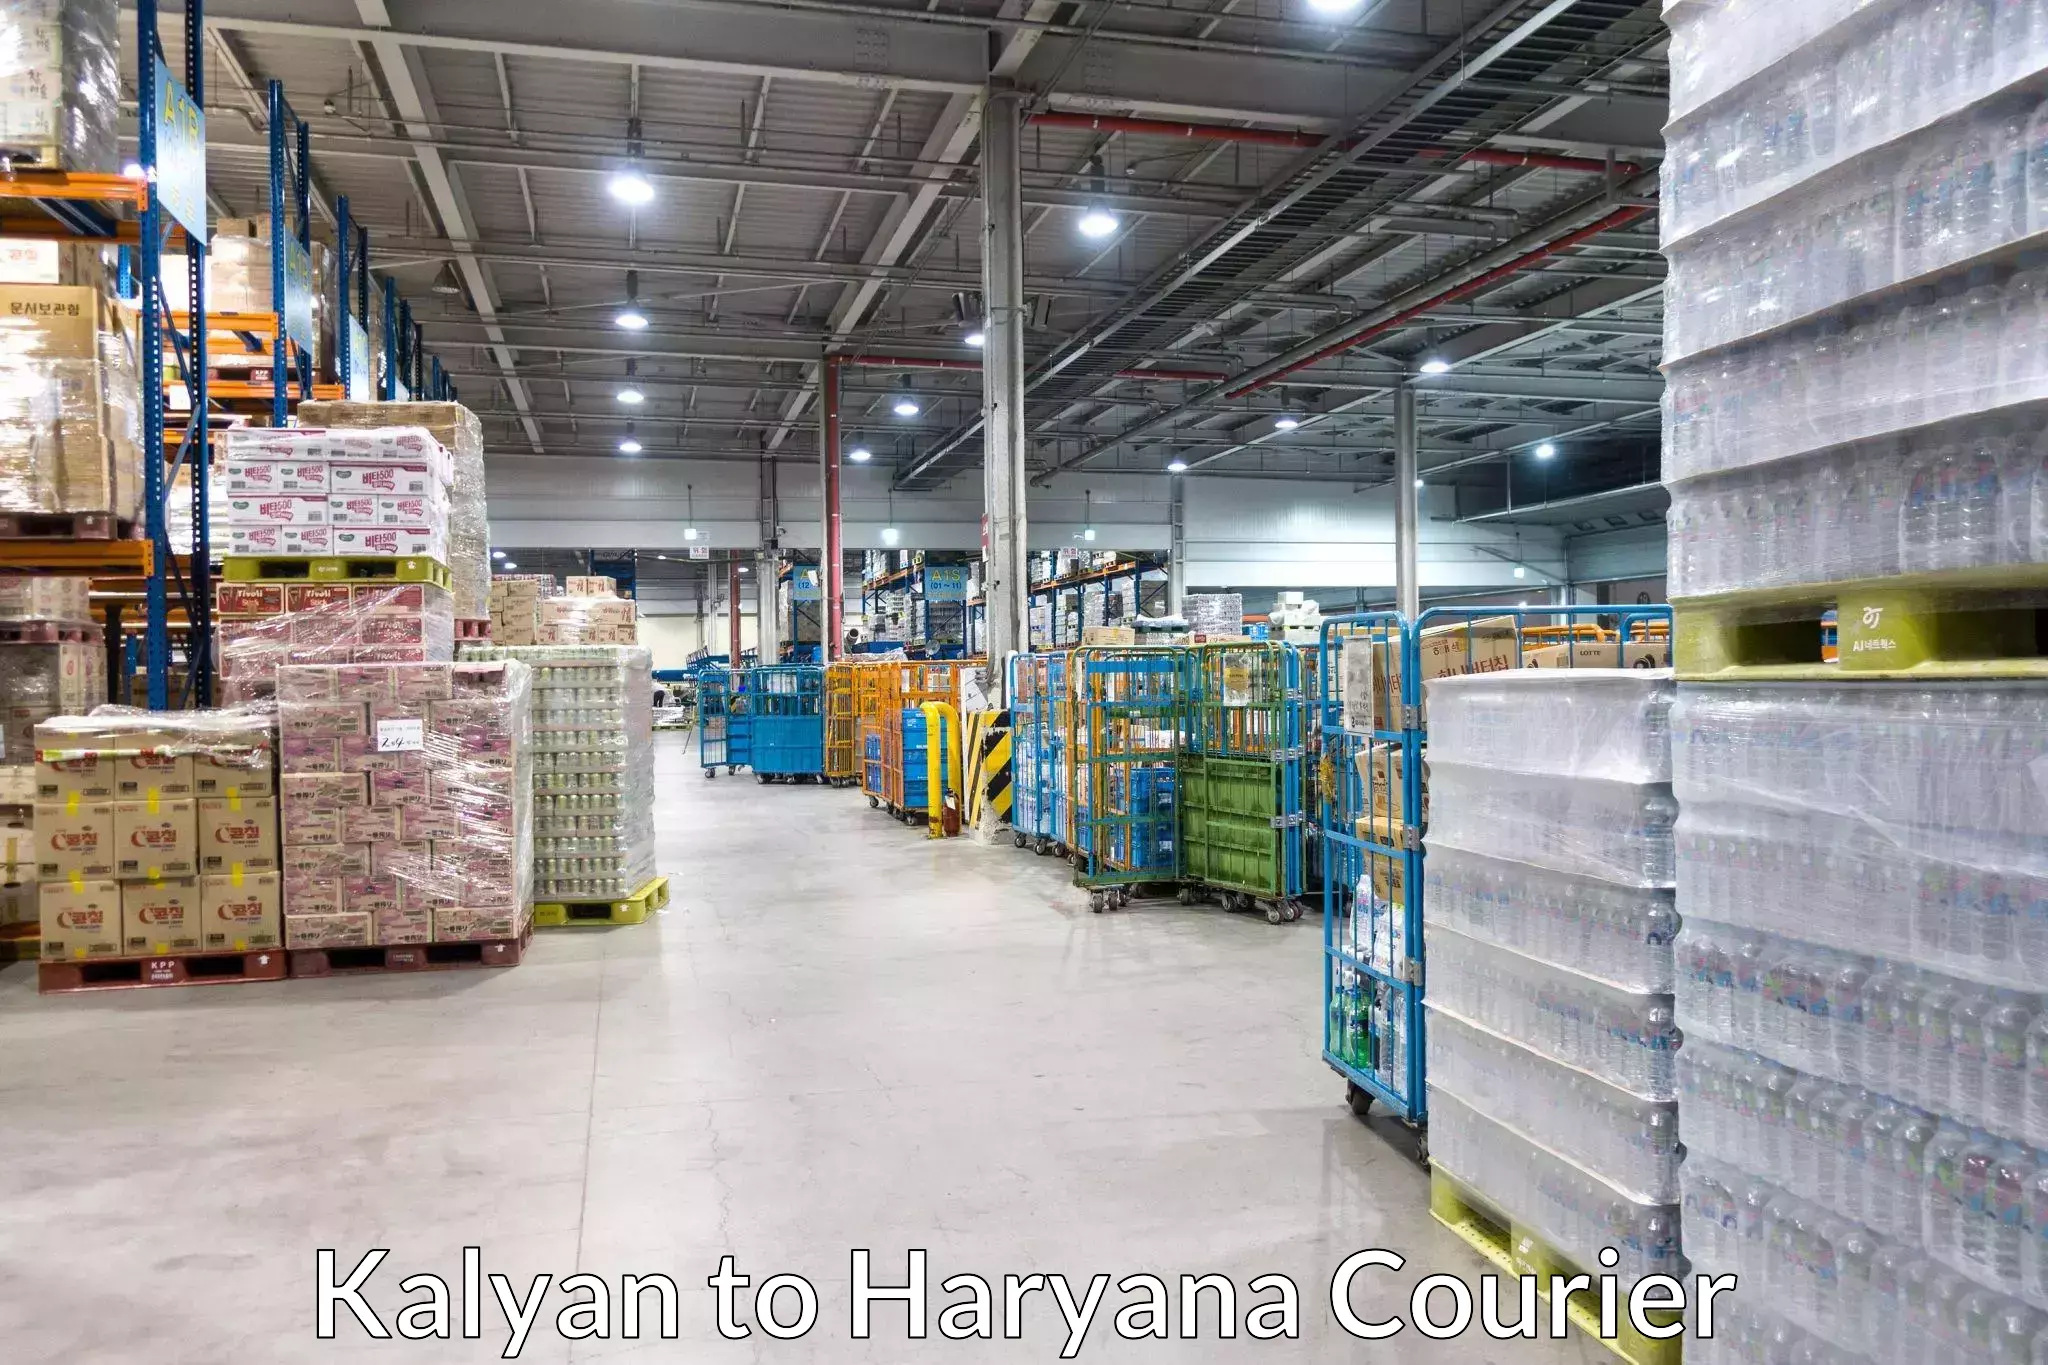 Delivery service partnership Kalyan to Nuh